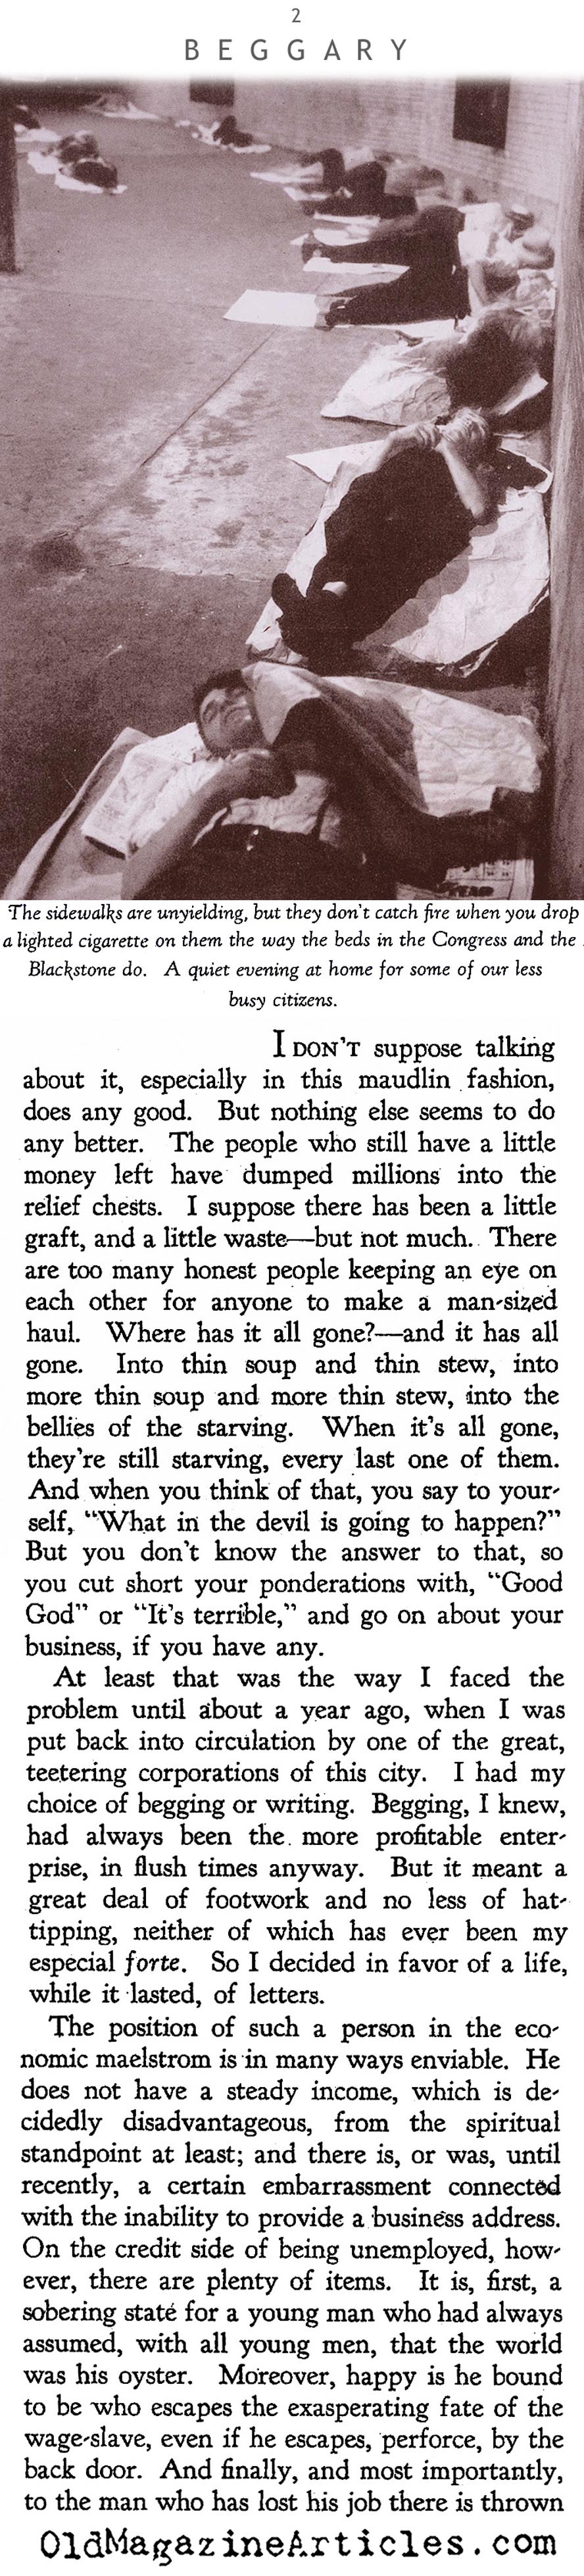 The Poor Are Everywhere (The Chicagoan, 1932)